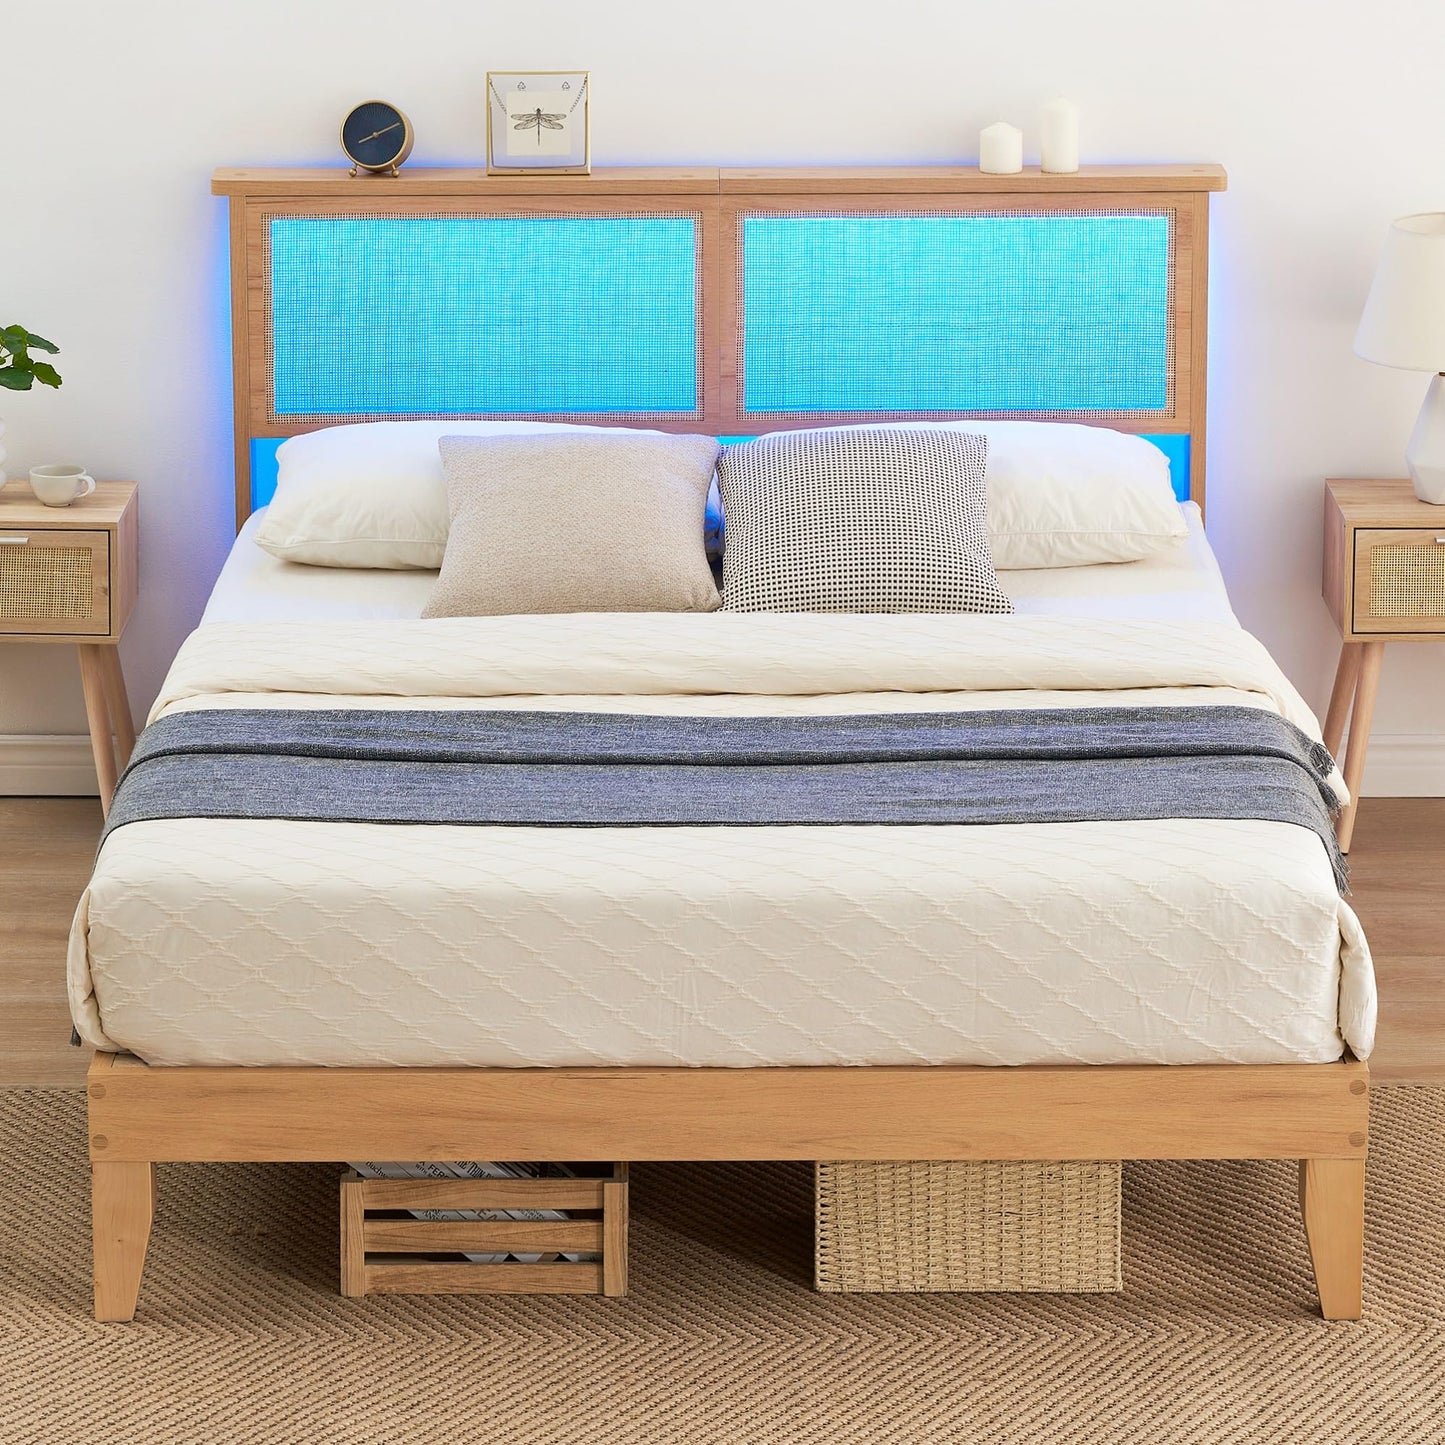 GAOMON Full Bed Frame with Natural Rattan Headboard, Full Size Platform Bed Frame with LED Lights & Curved Rattan Headboard & Wooden Support Legs, No